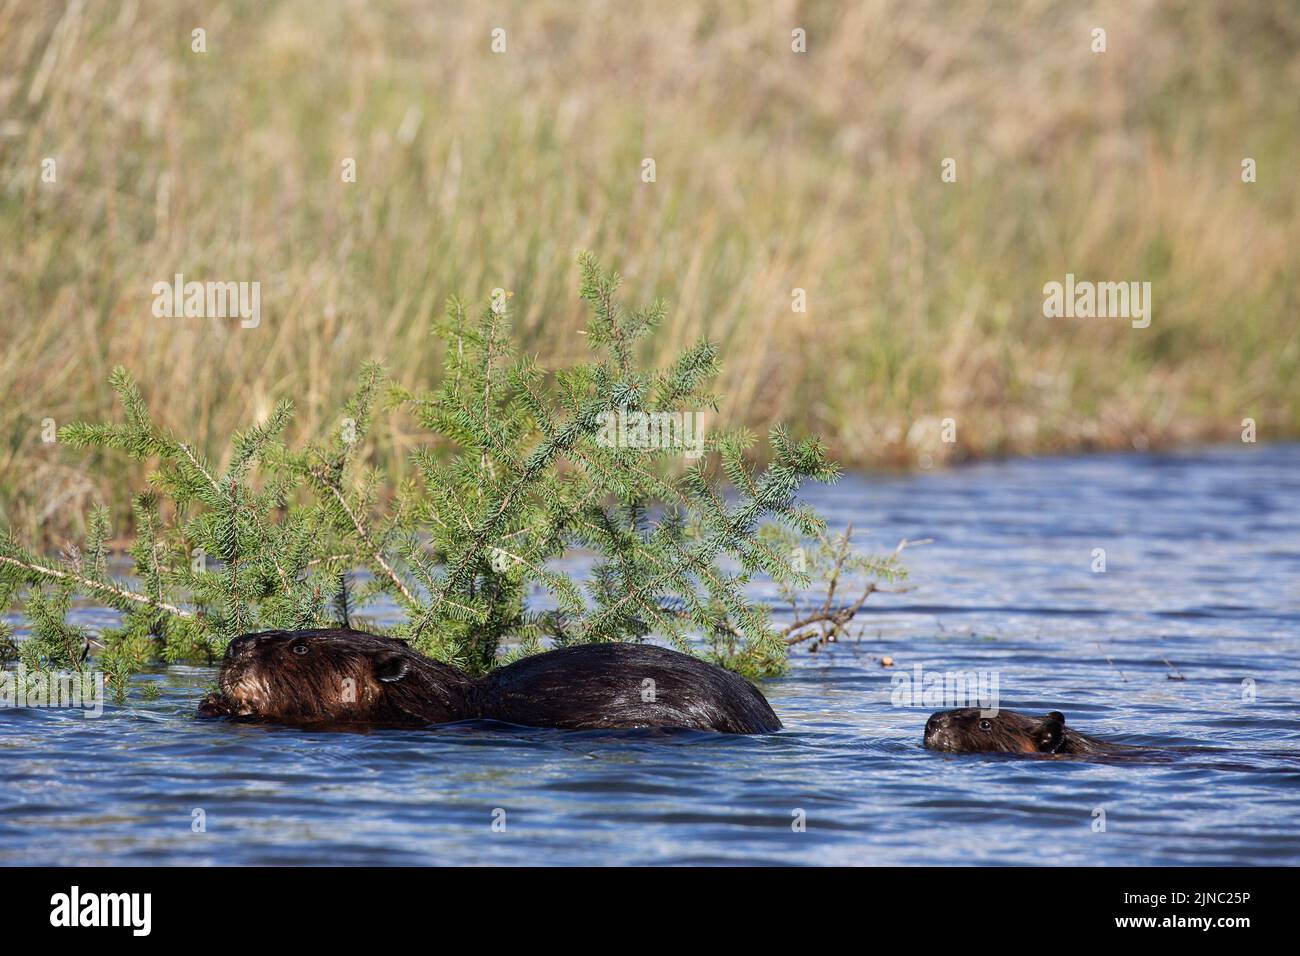 North American beaver family, parent animal with baby, eating a white spruce tree branch at water's edge. Castor canadensis, Picea glauca Stock Photo